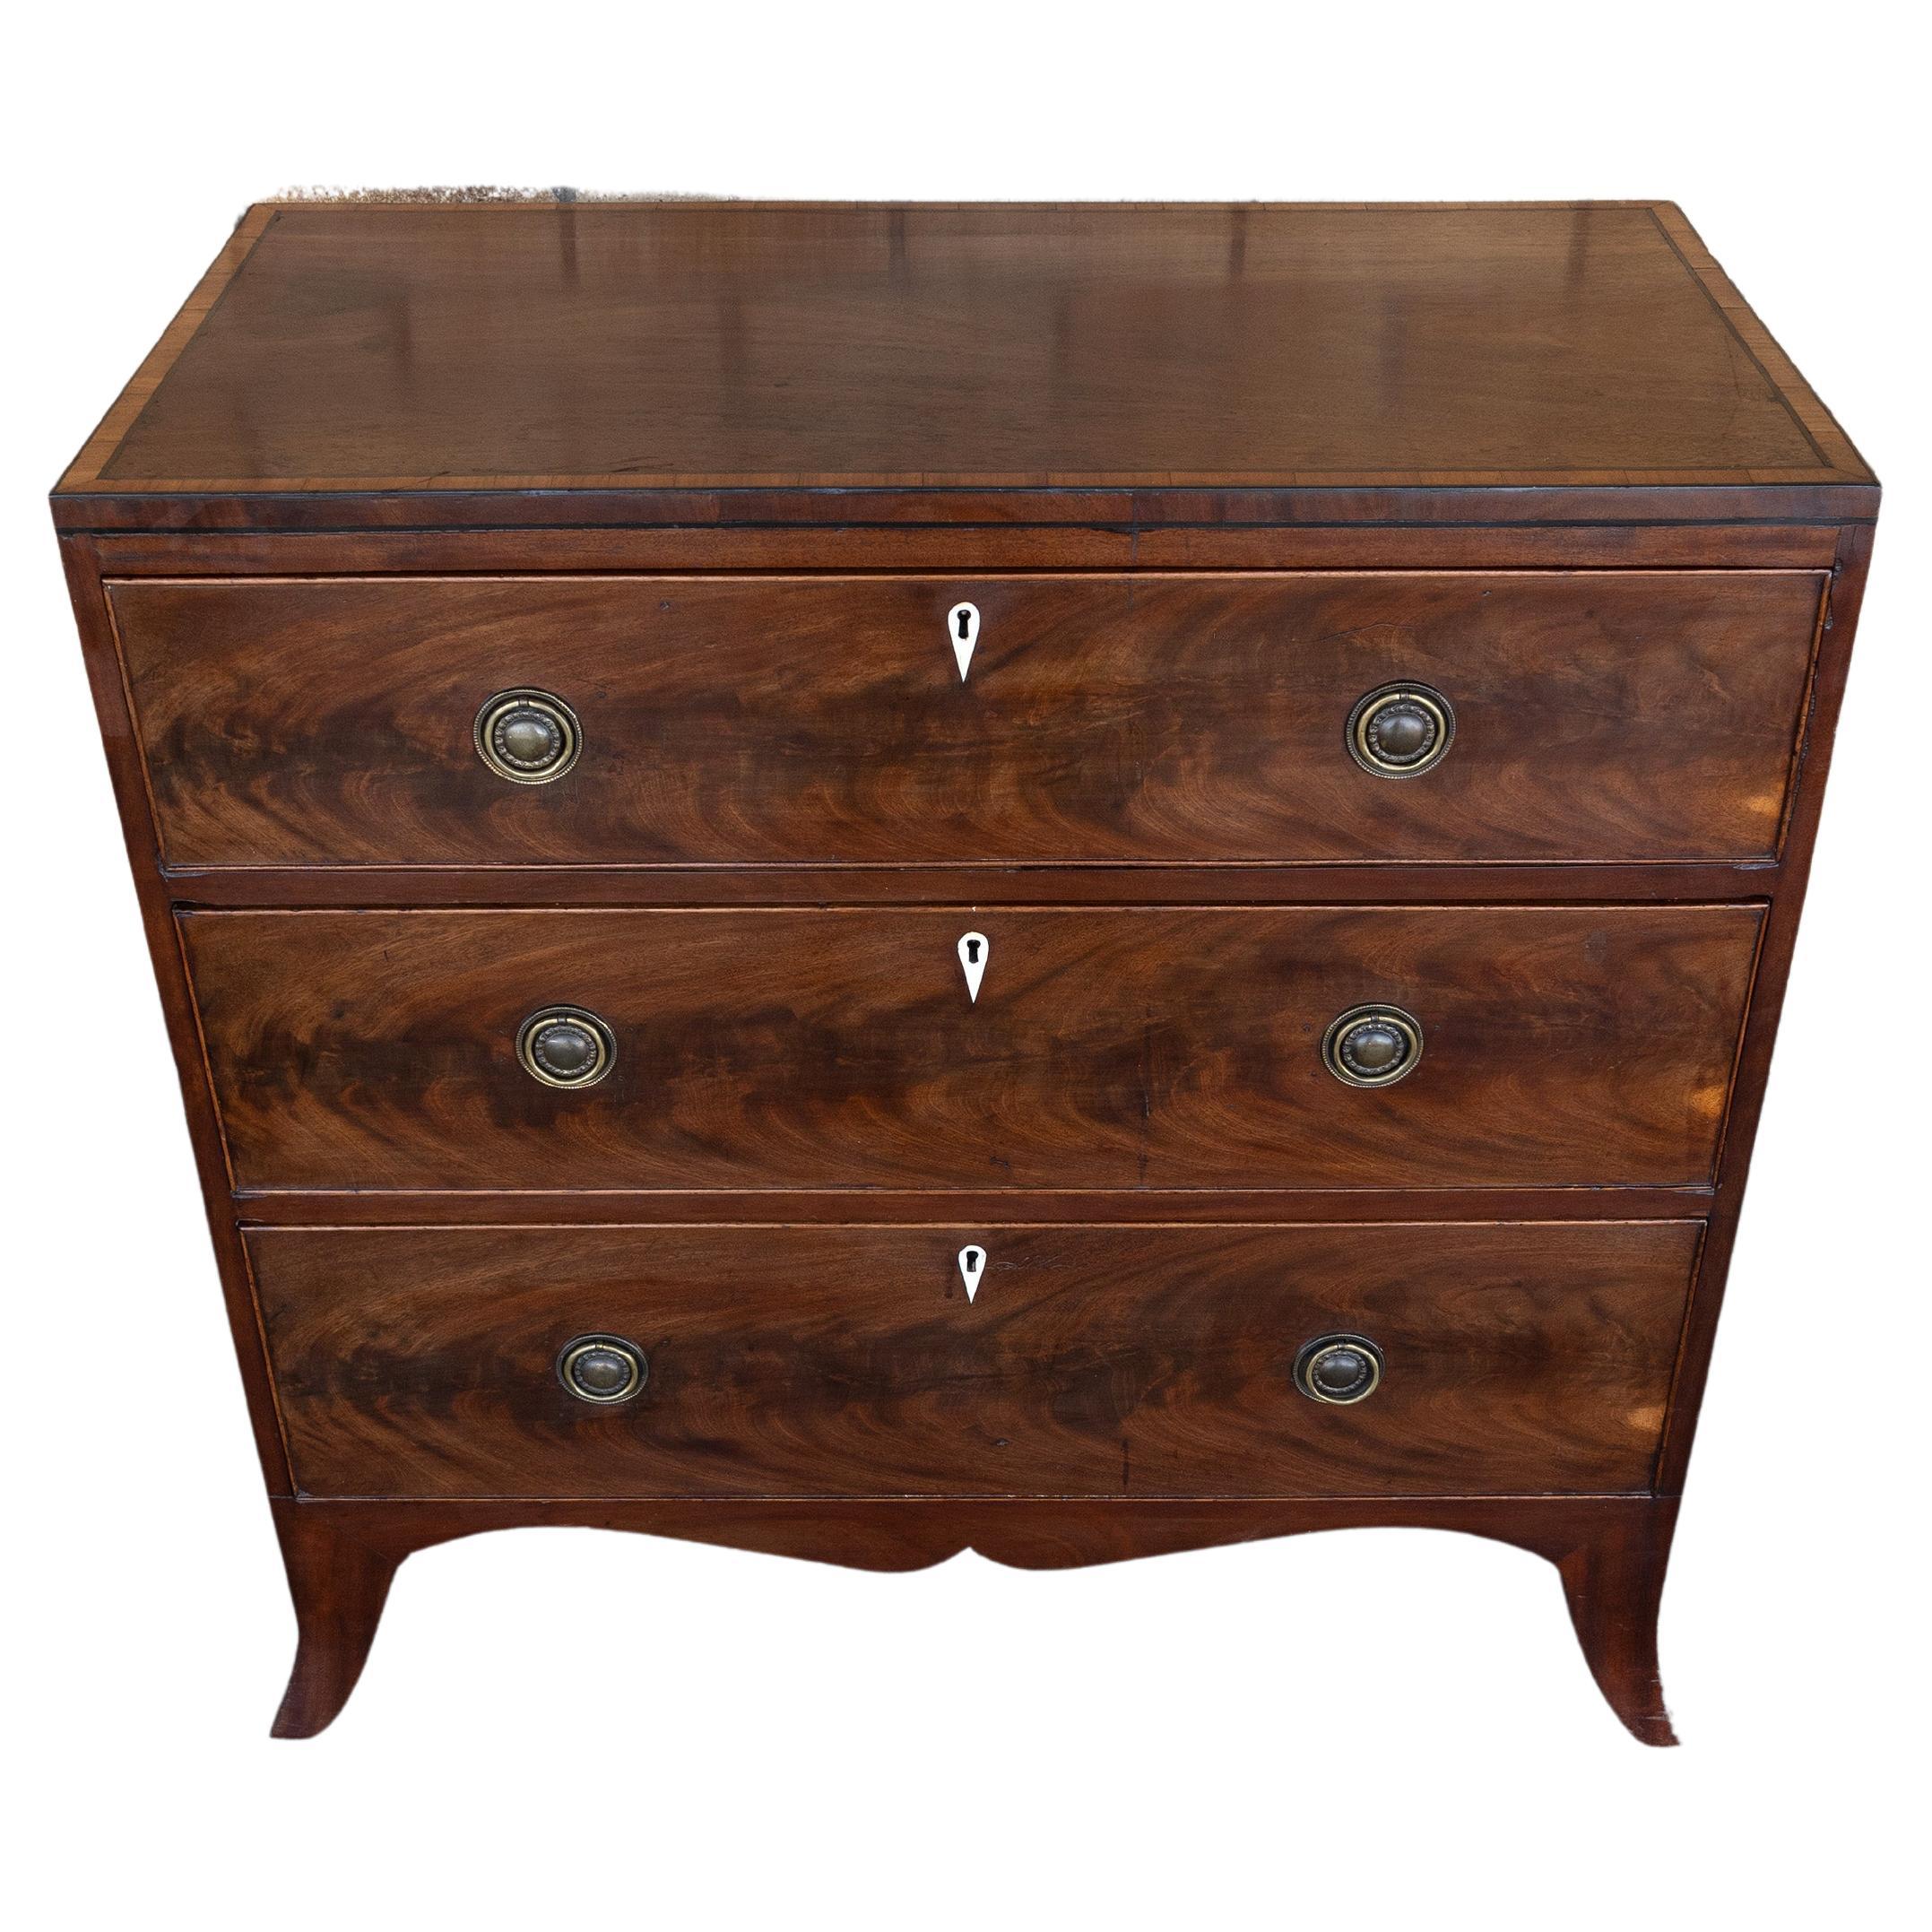 Antique English 19th Century Regency Diminutive Chest Of Drawers C.1810 For Sale 6